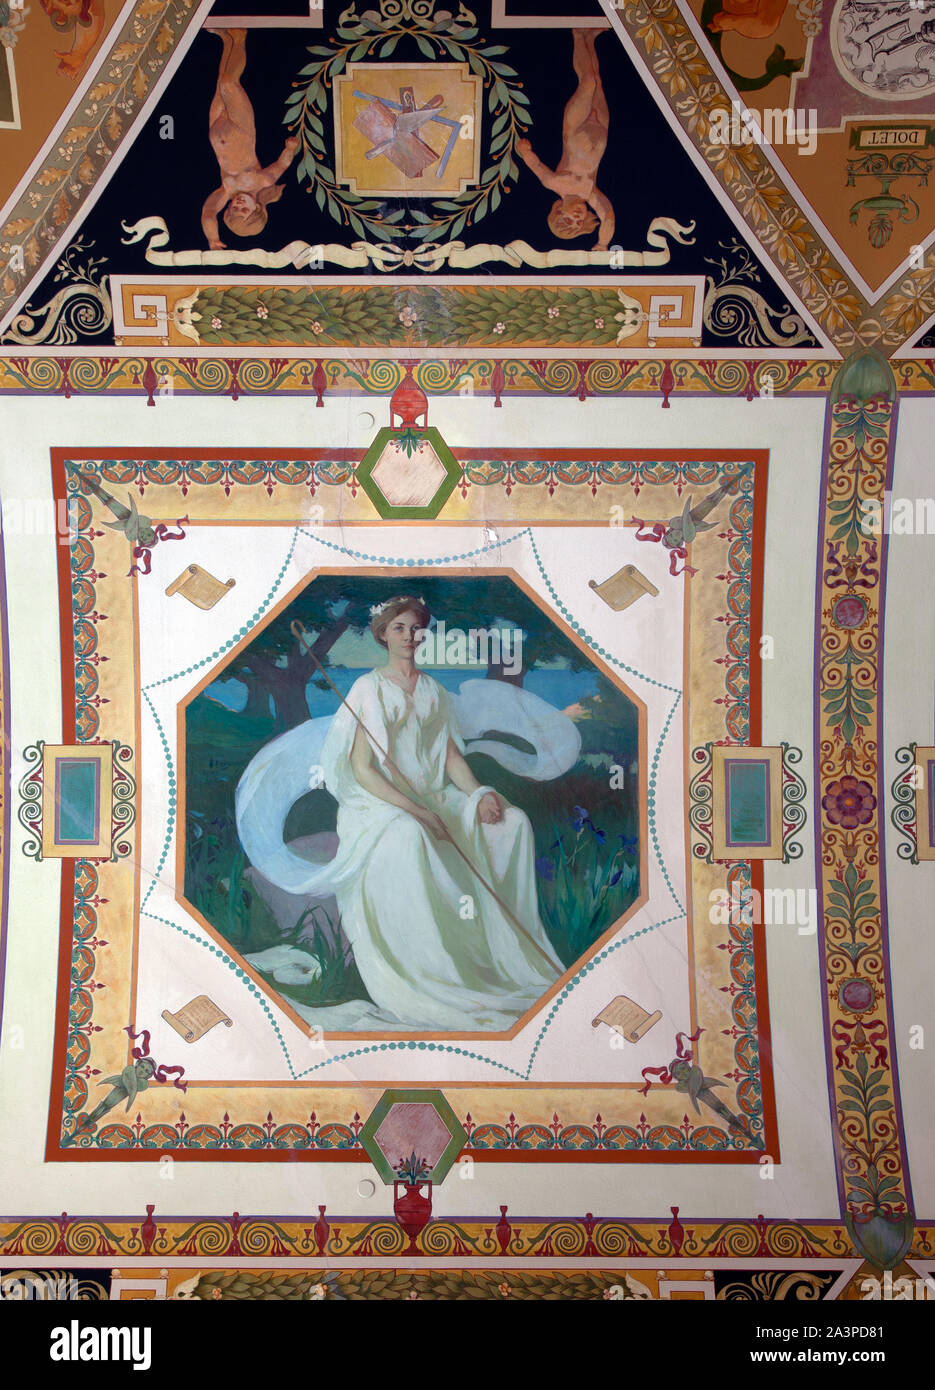 South Corridor, Second floor. Mural depicting one of the three graces, Aglaia (Husbandry), by Frank Weston Benson. Library of Congress Thomas Jefferson Building, Washington, D.C. Stock Photo